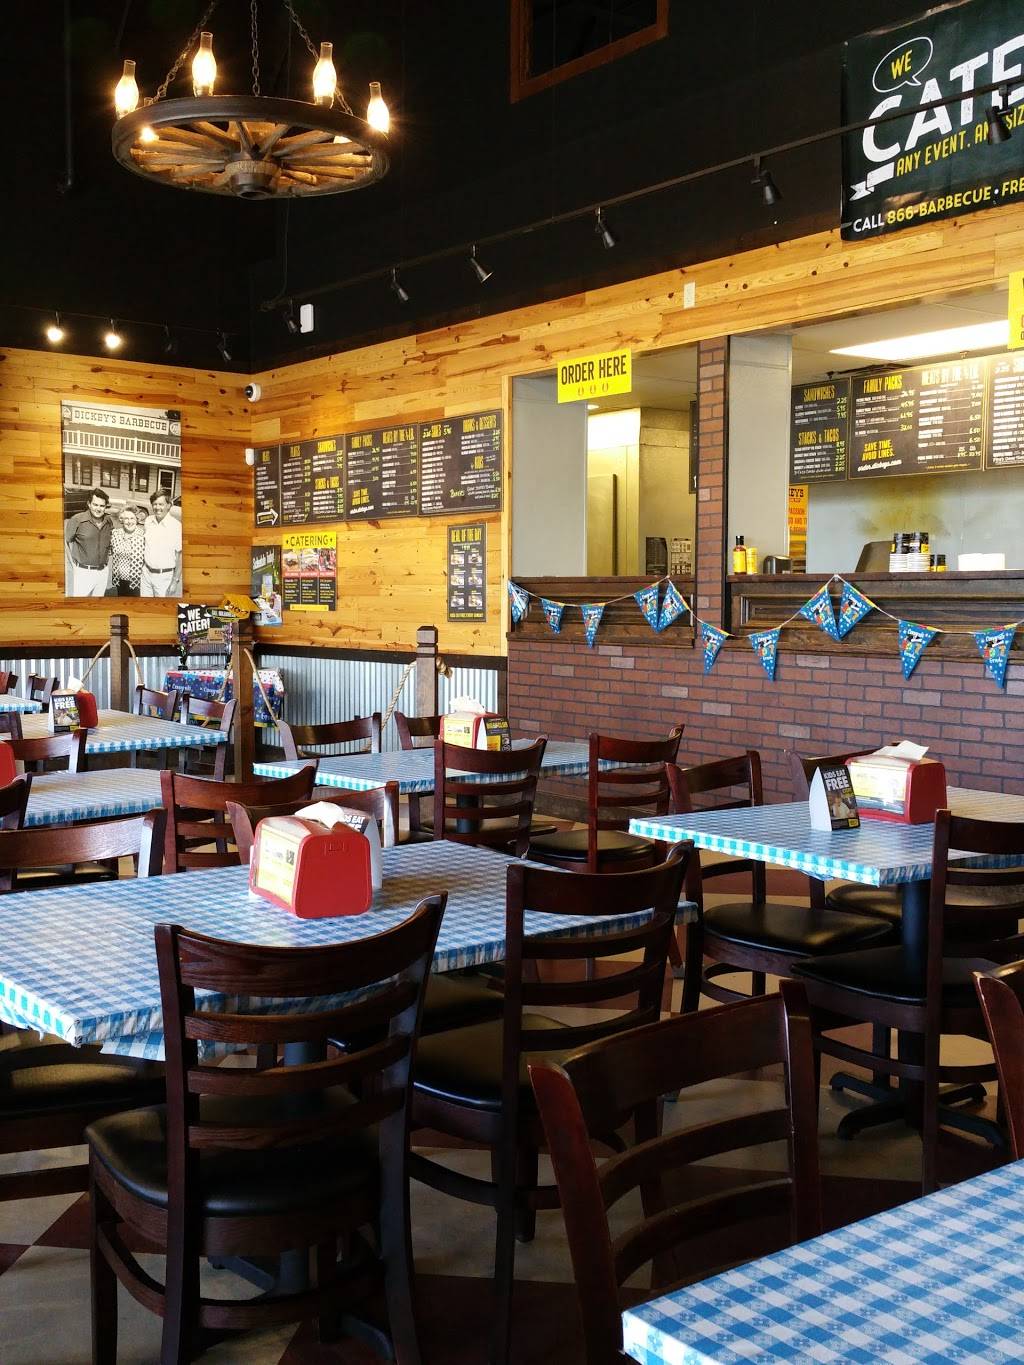 Dickeys Barbecue Pit - Restaurant | 6628 W 10th St, Greeley, CO 80634, USA1024 x 1365